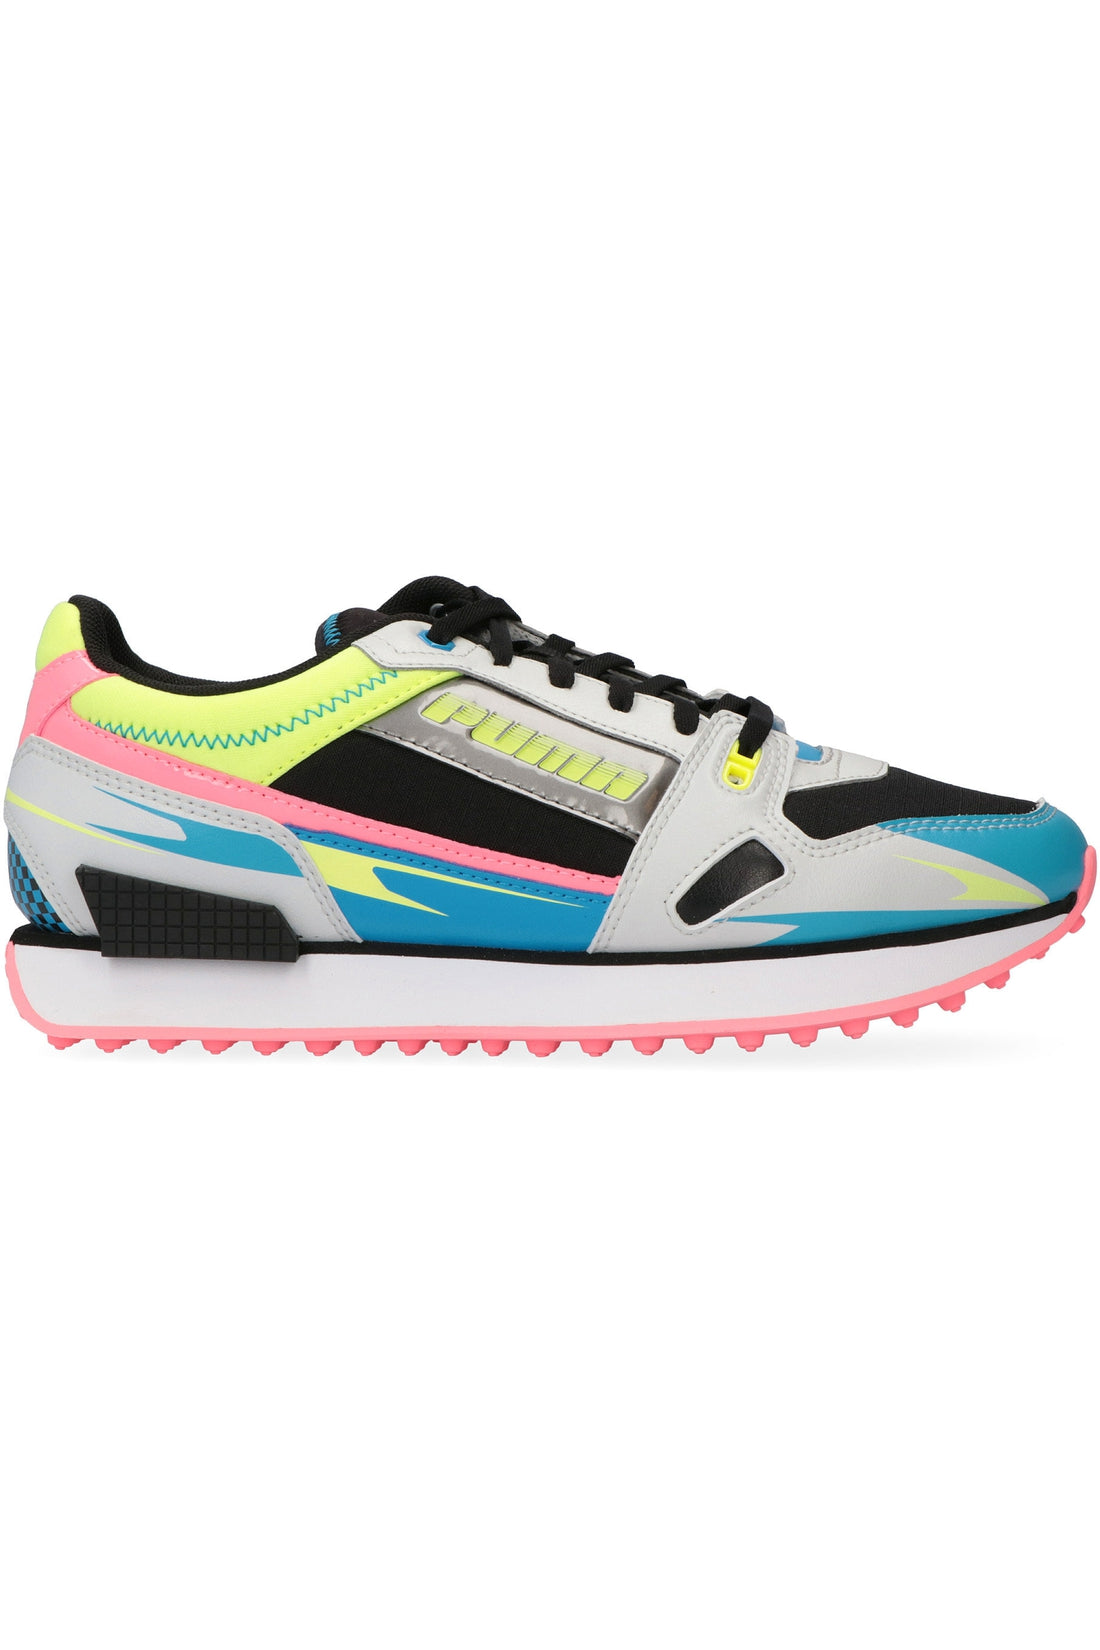 Puma-OUTLET-SALE-Mile Rider Sunny Getaway sneakers-ARCHIVIST